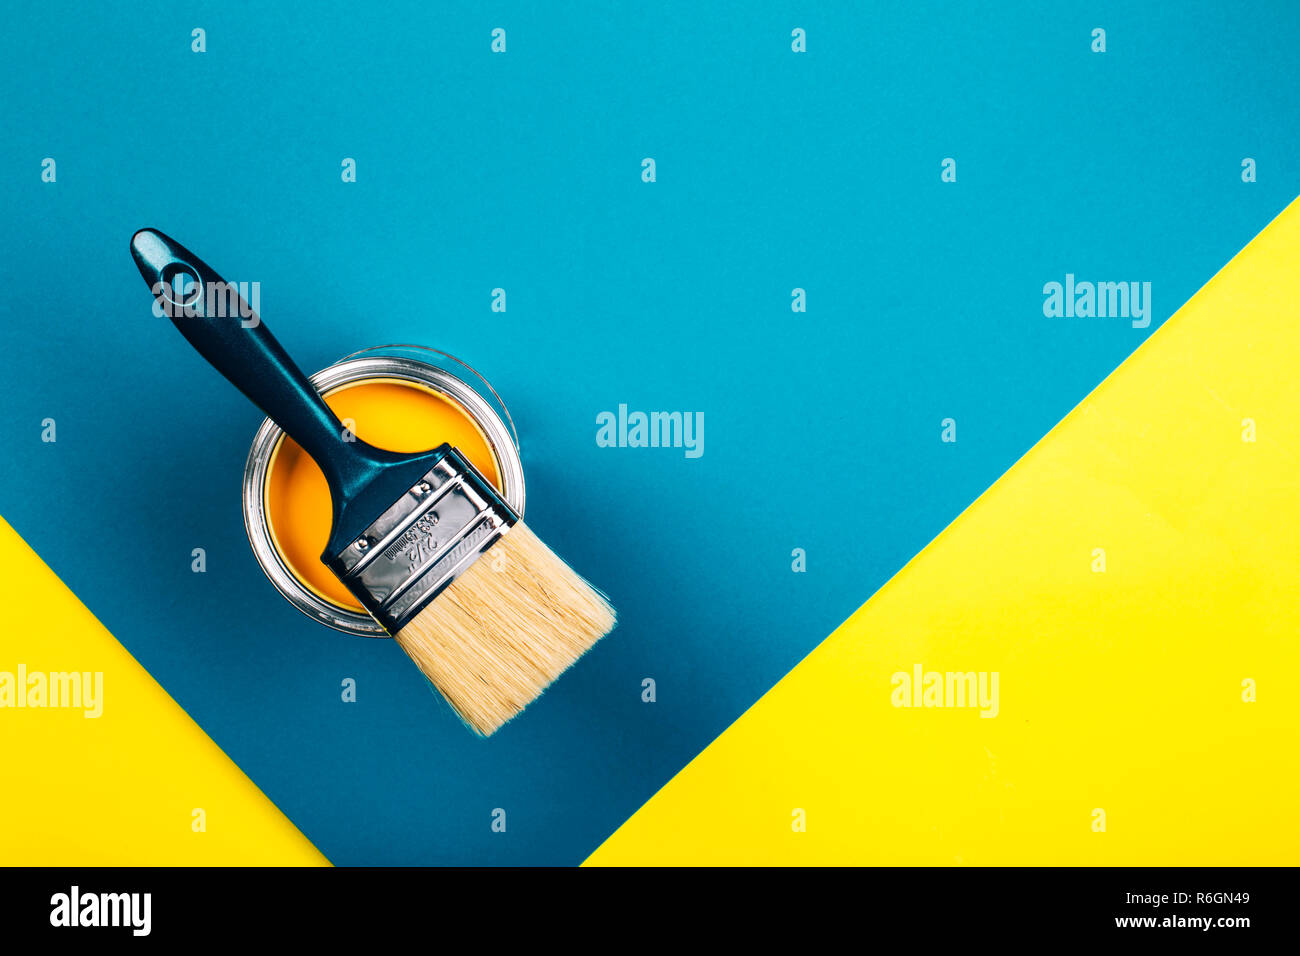 Brush on open can of yellow color paint on yellow and blue background. Flat lay style. Renovation concept. Stock Photo